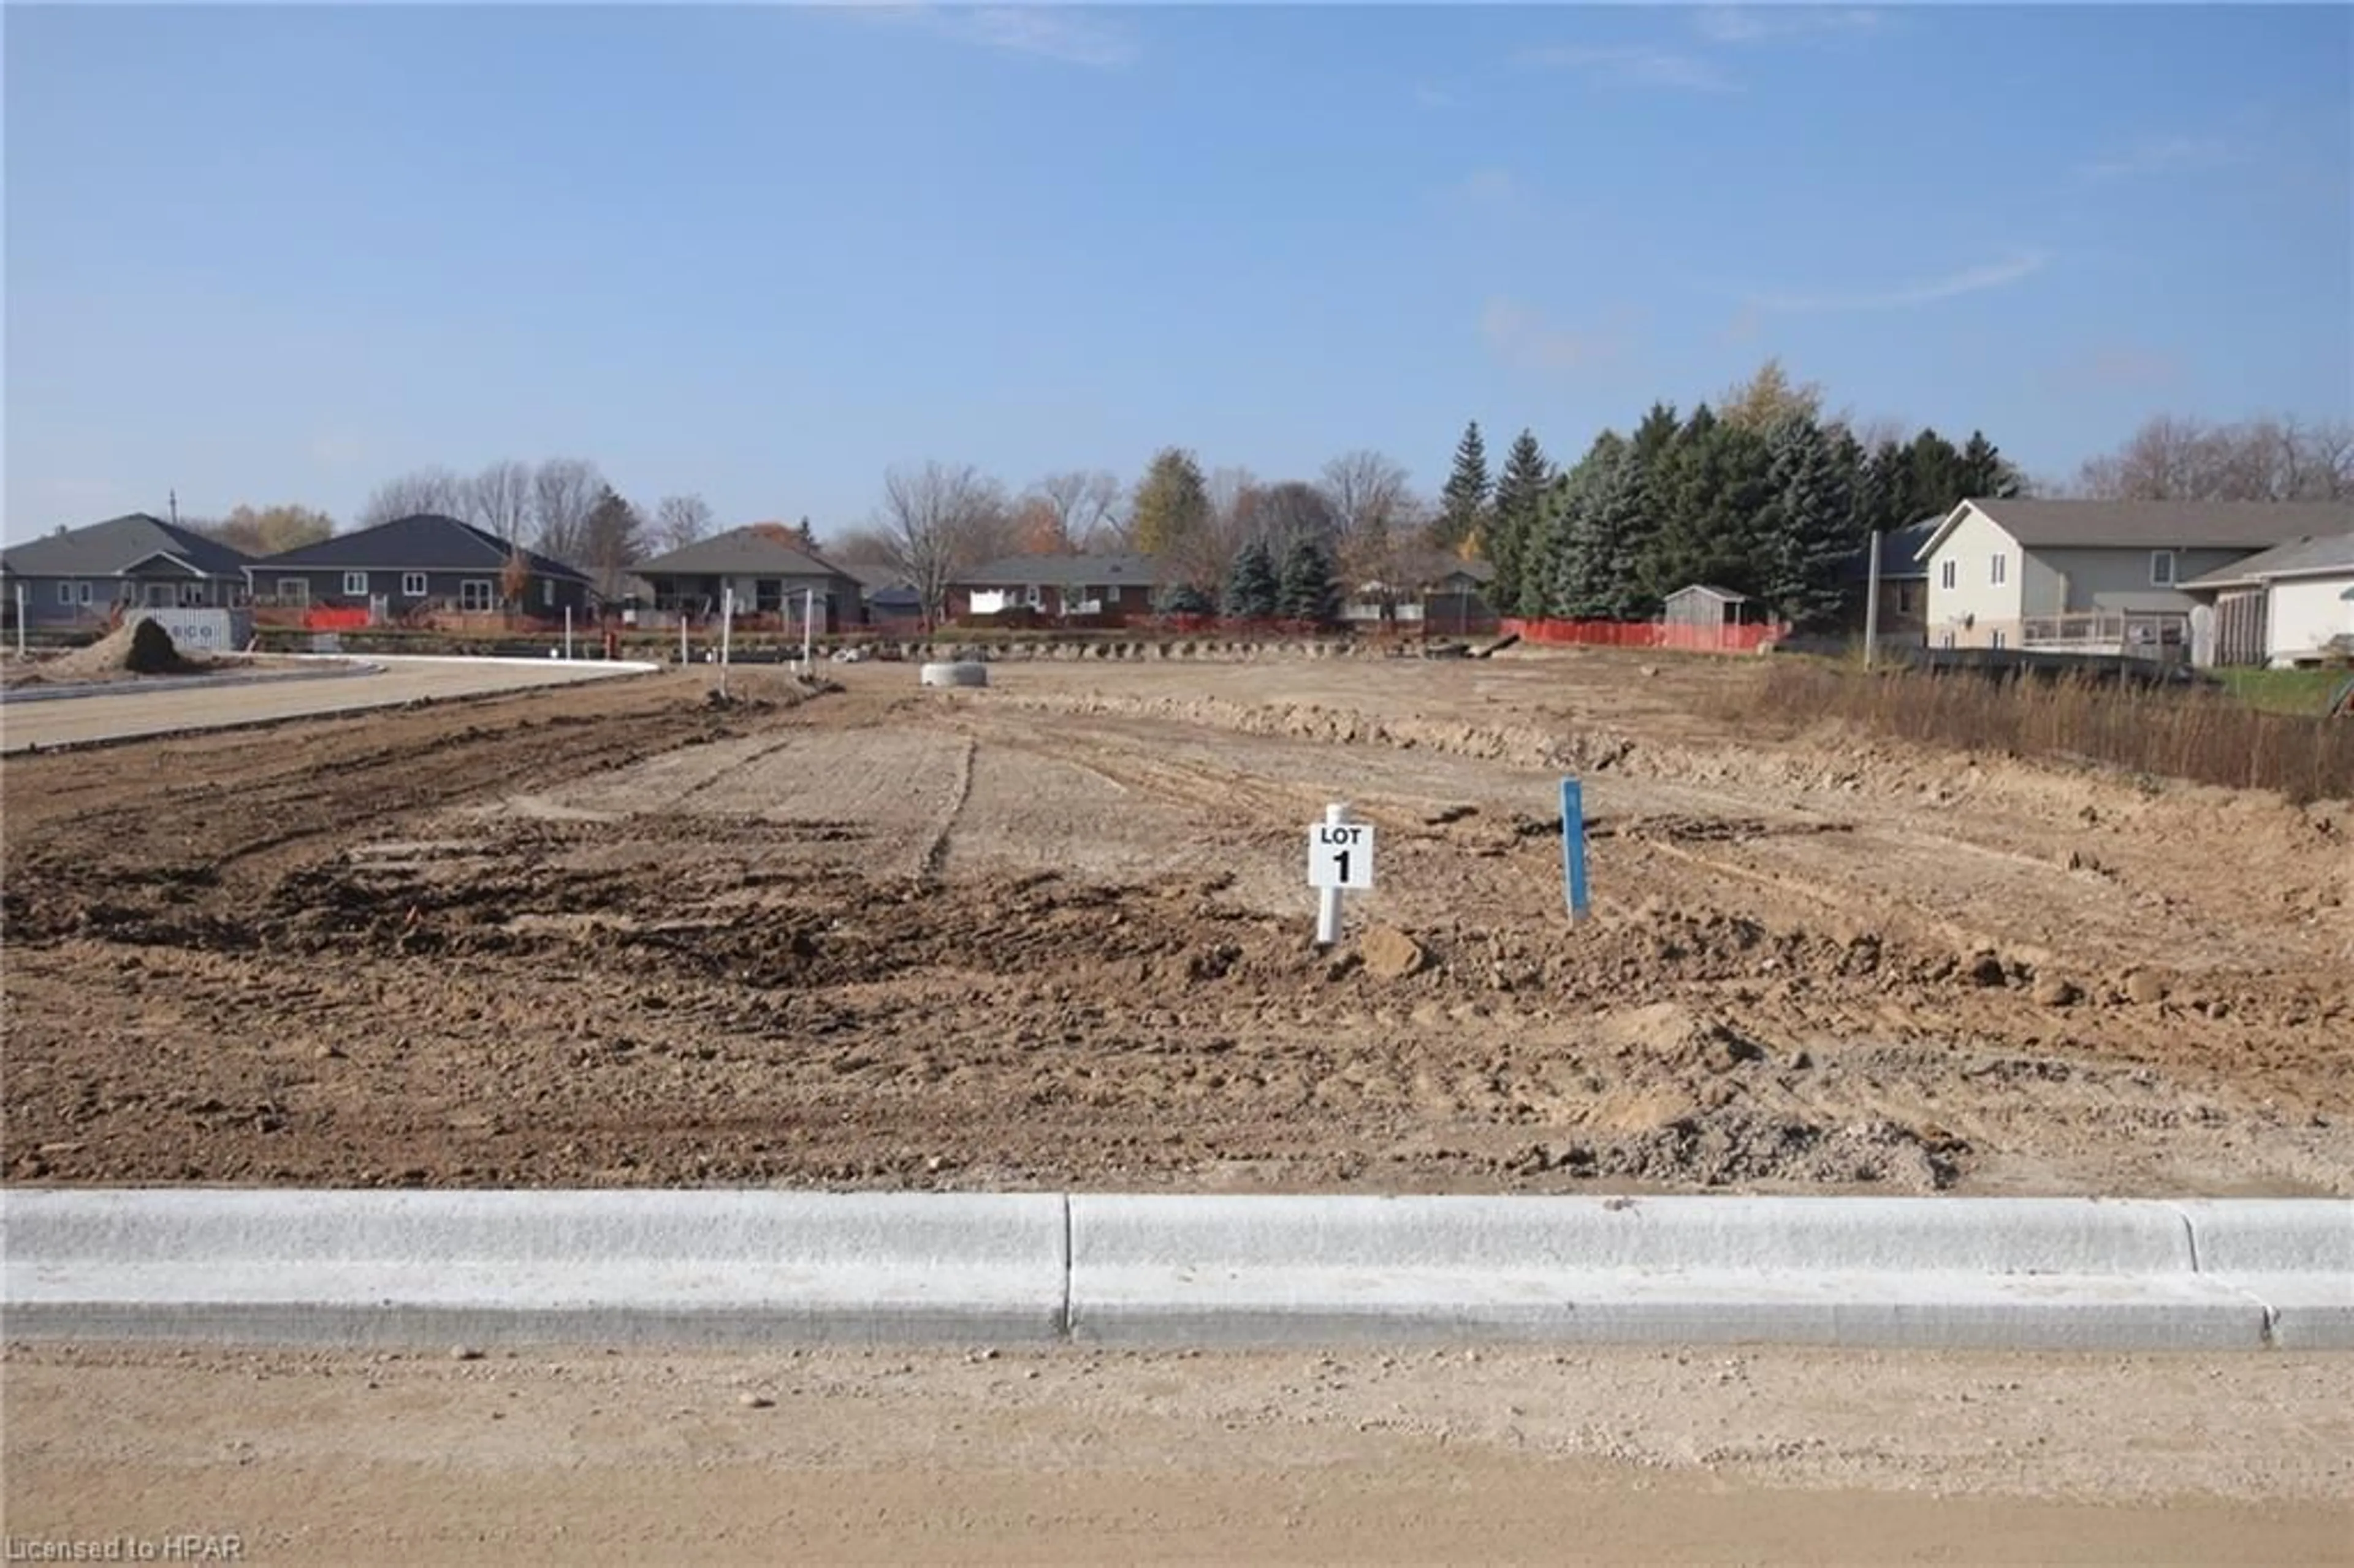 Street view for LOT 1 Bryans Dr, Brussels Ontario N0G 1H0